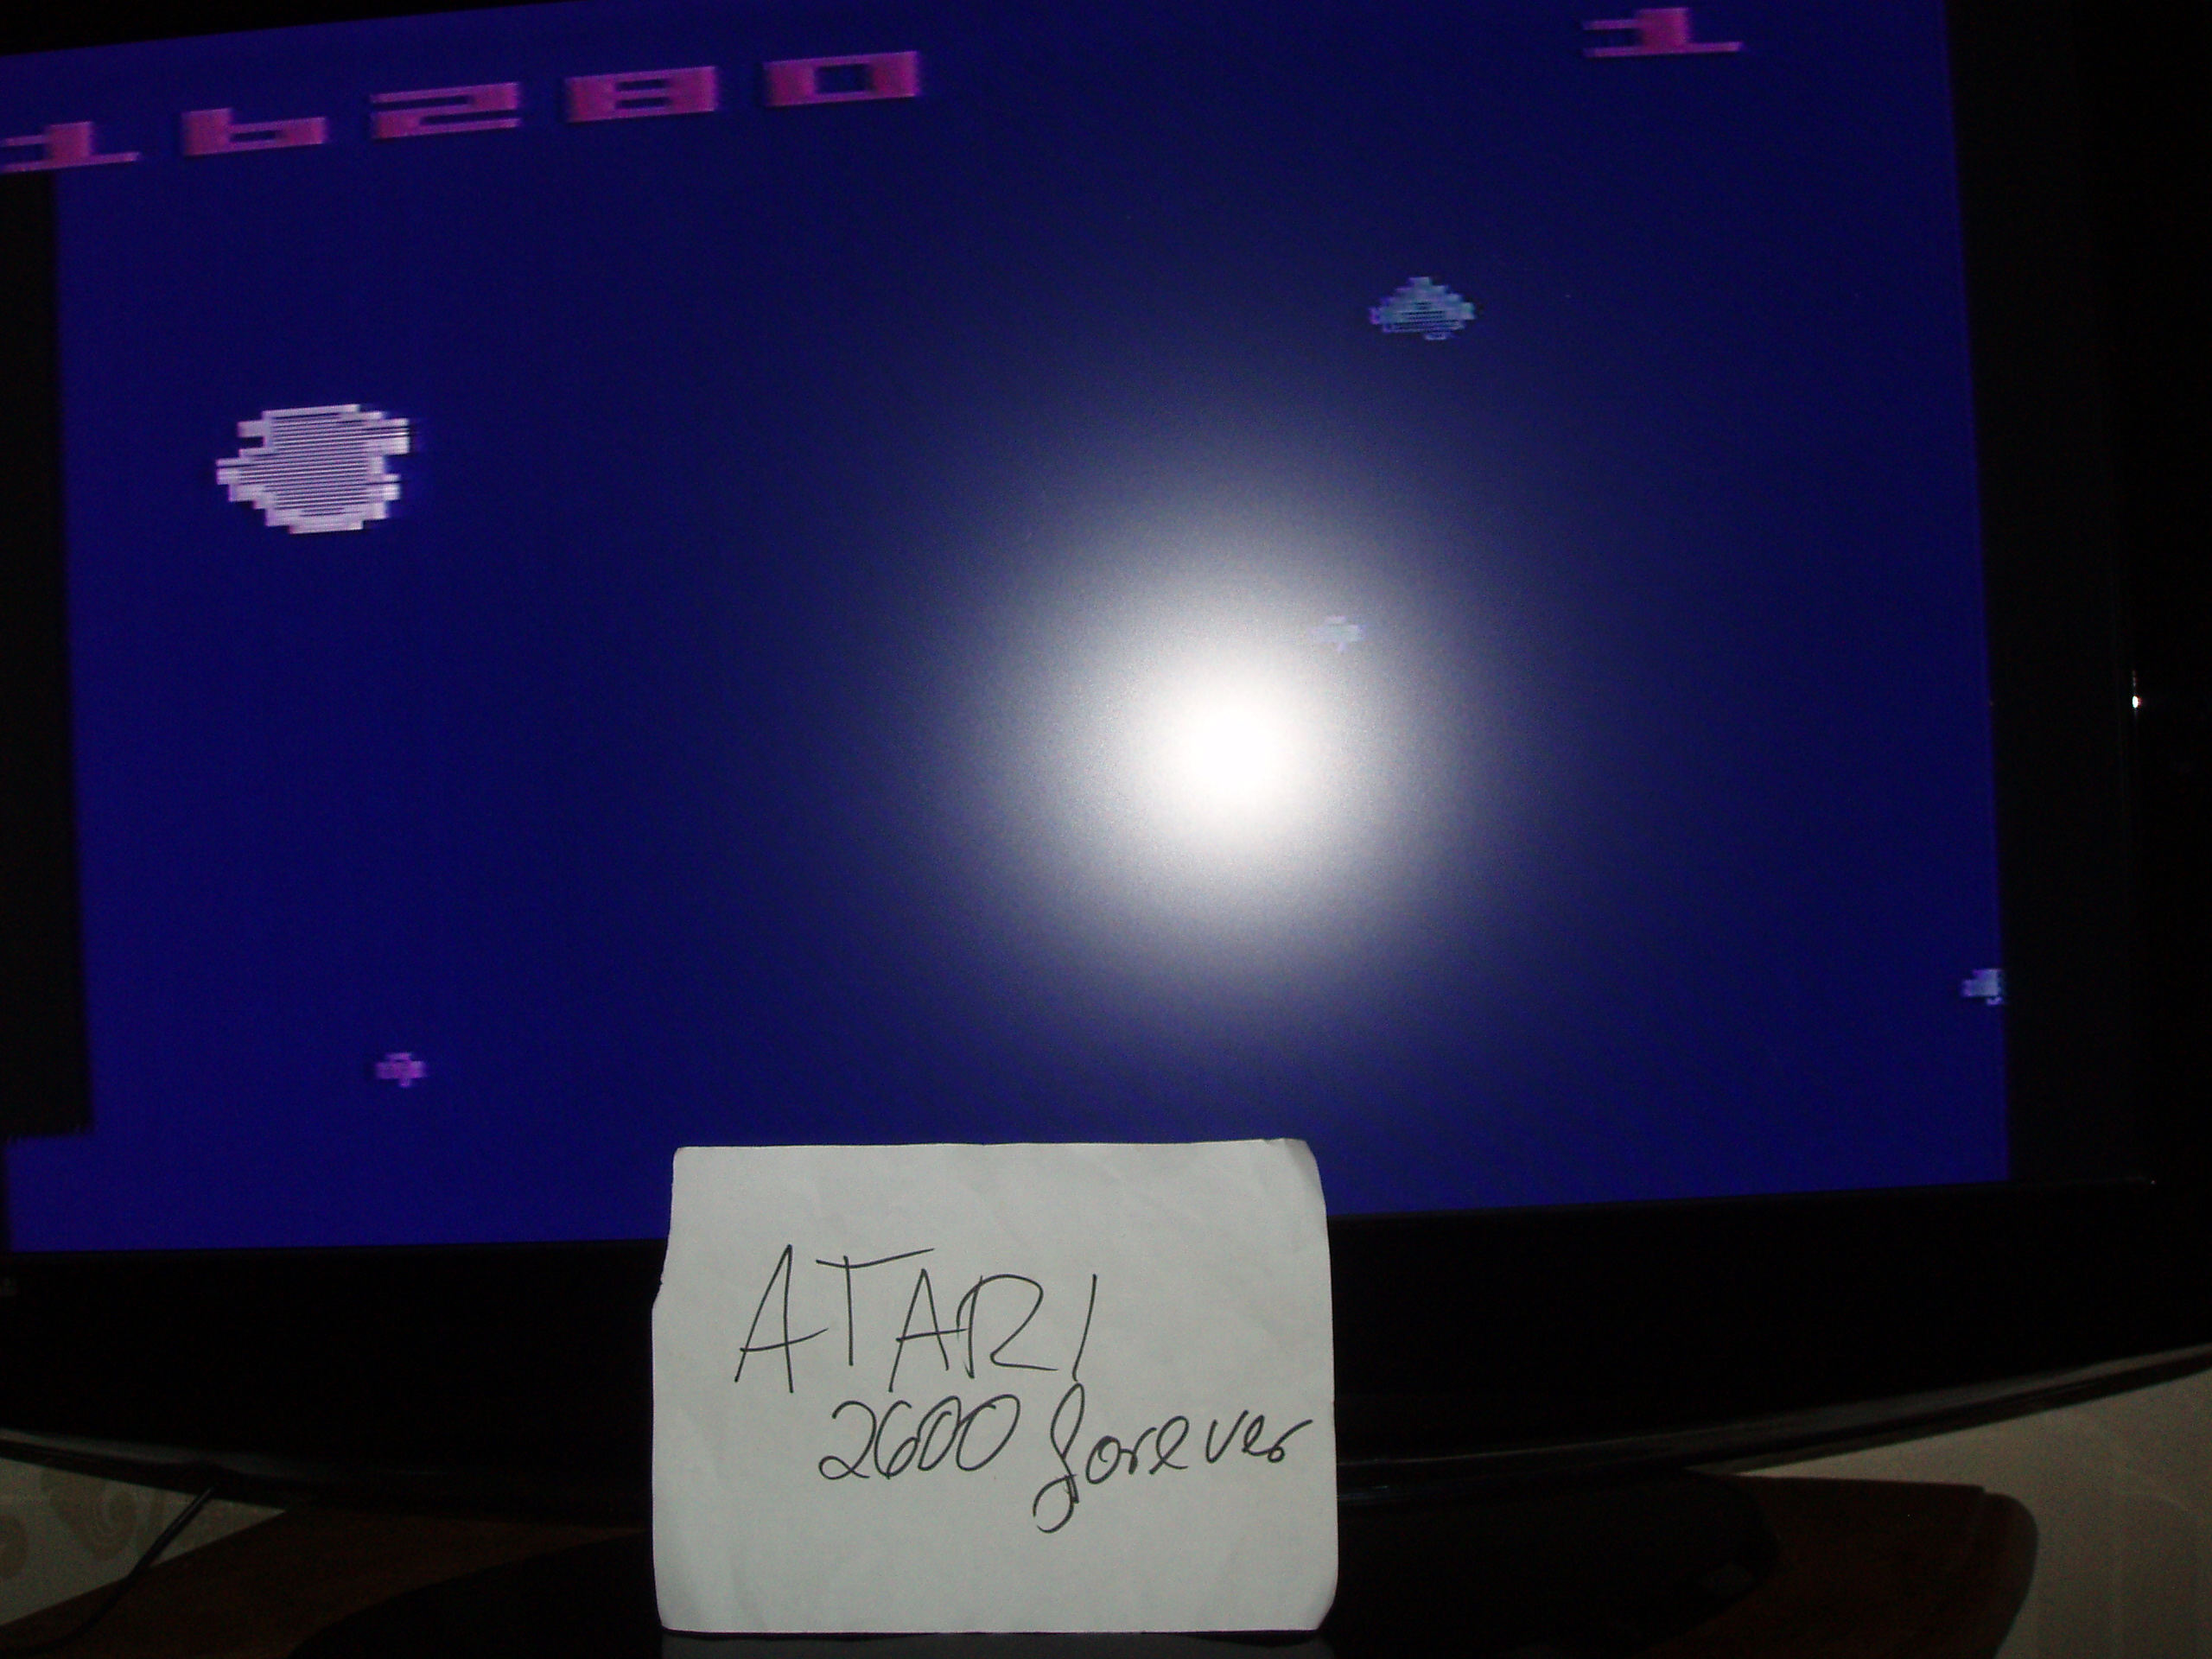 atari2600forever: Asteroids: Game 4 (Atari 2600 Expert/A) 16,280 points on 2018-08-21 01:46:37